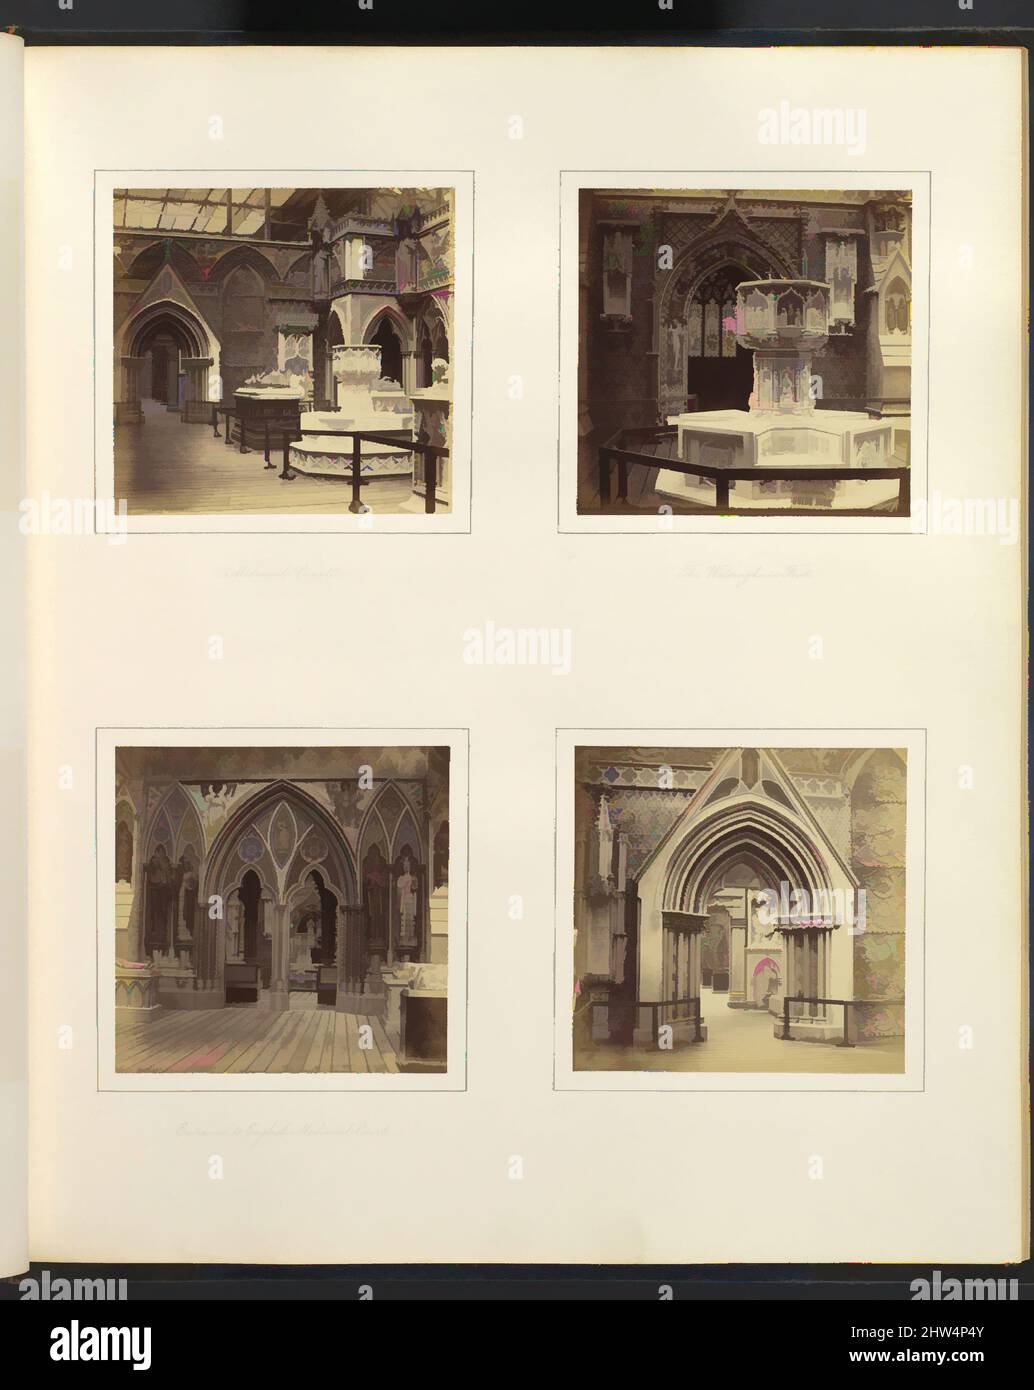 Art inspired by Medieval Court; The Walsingham Font; Entrance to English Medieval Court, ca. 1859, Albumen silver print from glass negative, 7.9 x 8.1 cm (3 1/8 x 3 3/16 in.), each, Photographs, Attributed to Philip Henry Delamotte (British, 1821–1889, Classic works modernized by Artotop with a splash of modernity. Shapes, color and value, eye-catching visual impact on art. Emotions through freedom of artworks in a contemporary way. A timeless message pursuing a wildly creative new direction. Artists turning to the digital medium and creating the Artotop NFT Stock Photo